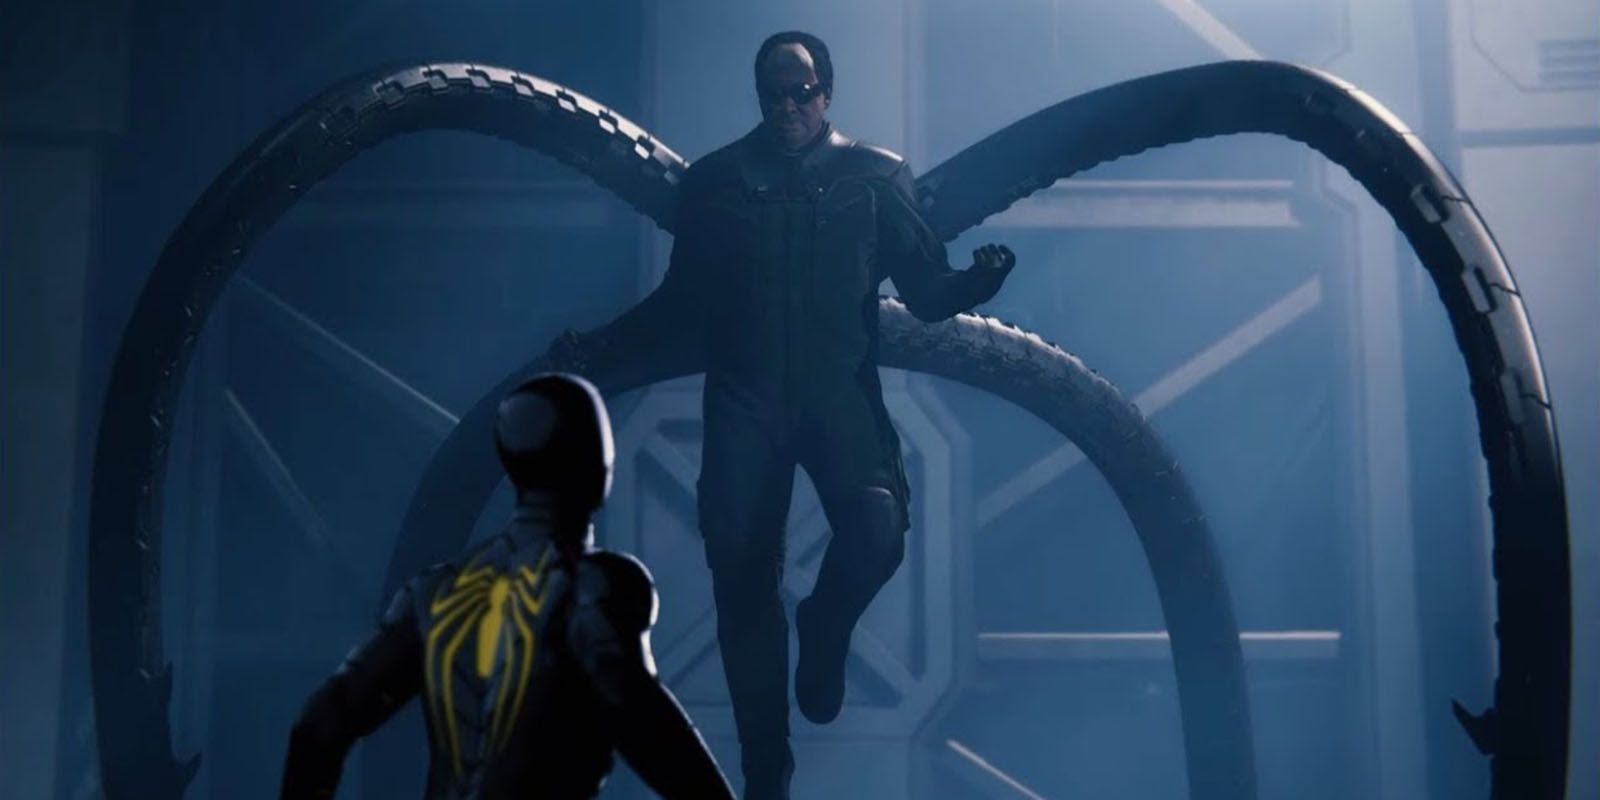 Doctor Octopus towers over Spiderman using his mechanical tentacles